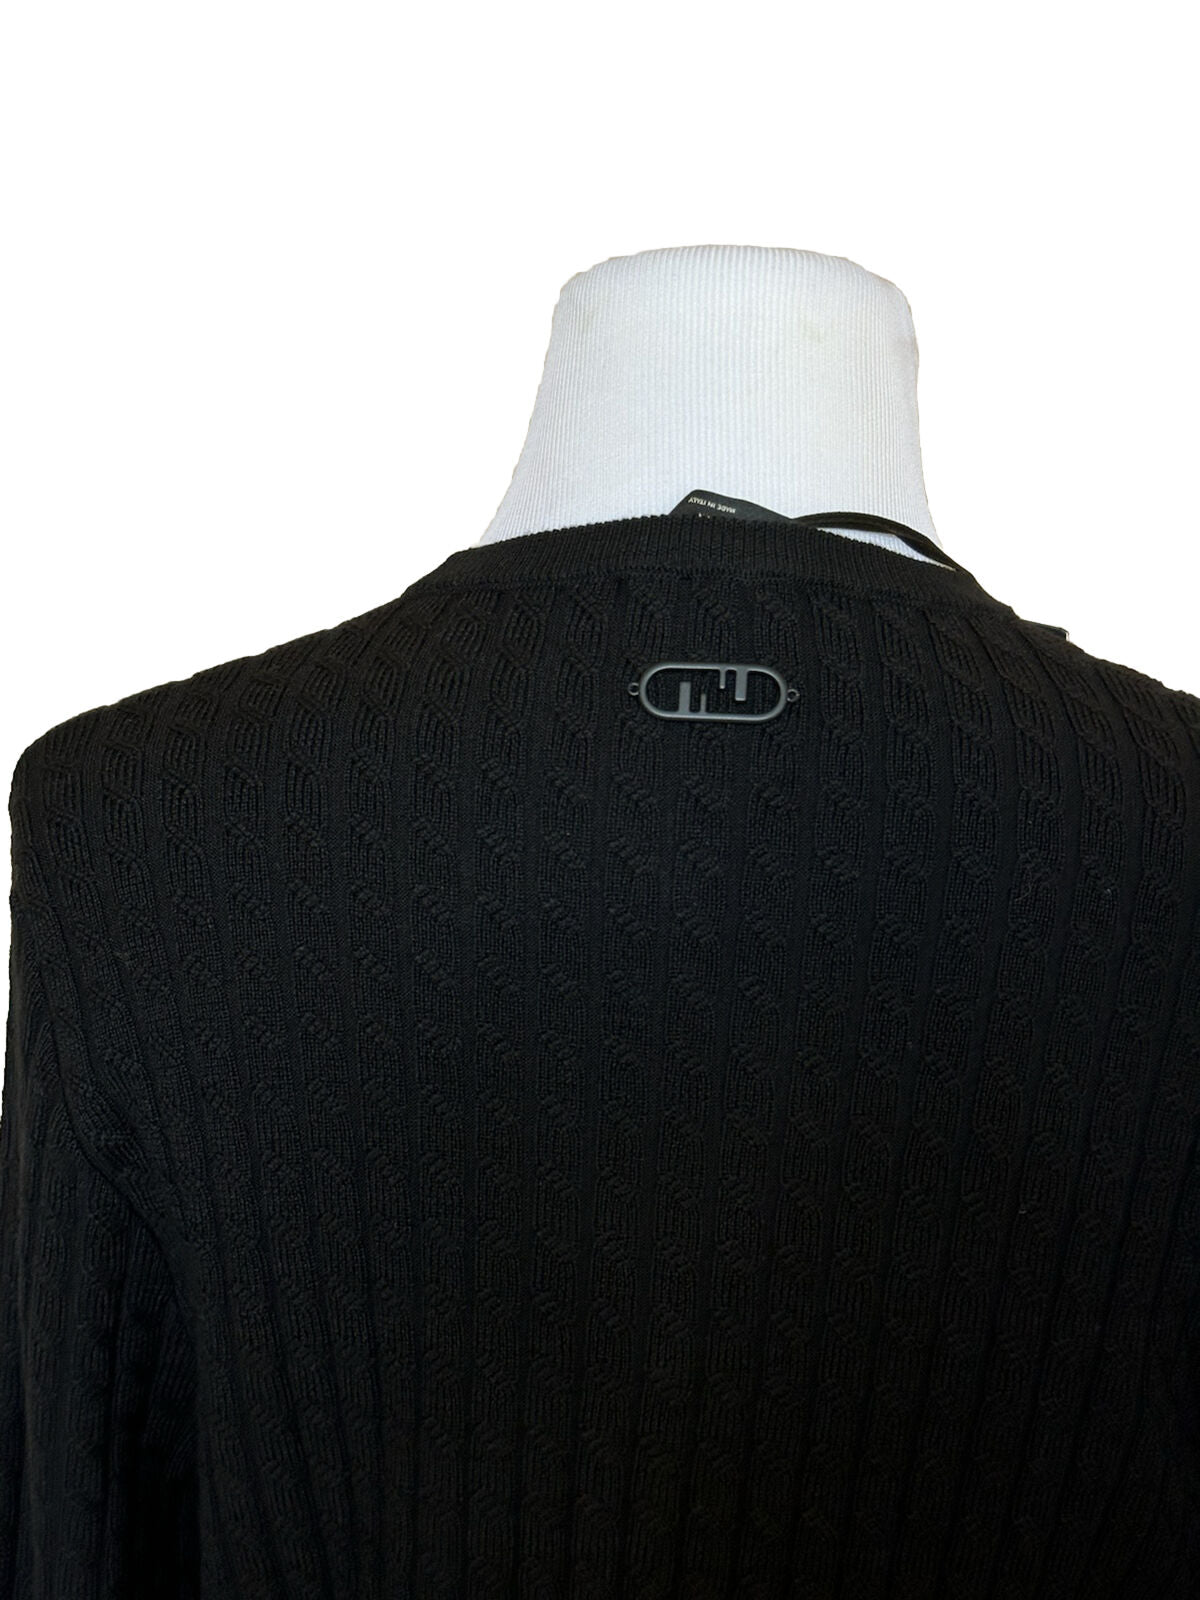 NWT $1250 Fendi Wool Knit Pullover Sweater Black 52 Euro FZX077 Made in Italy